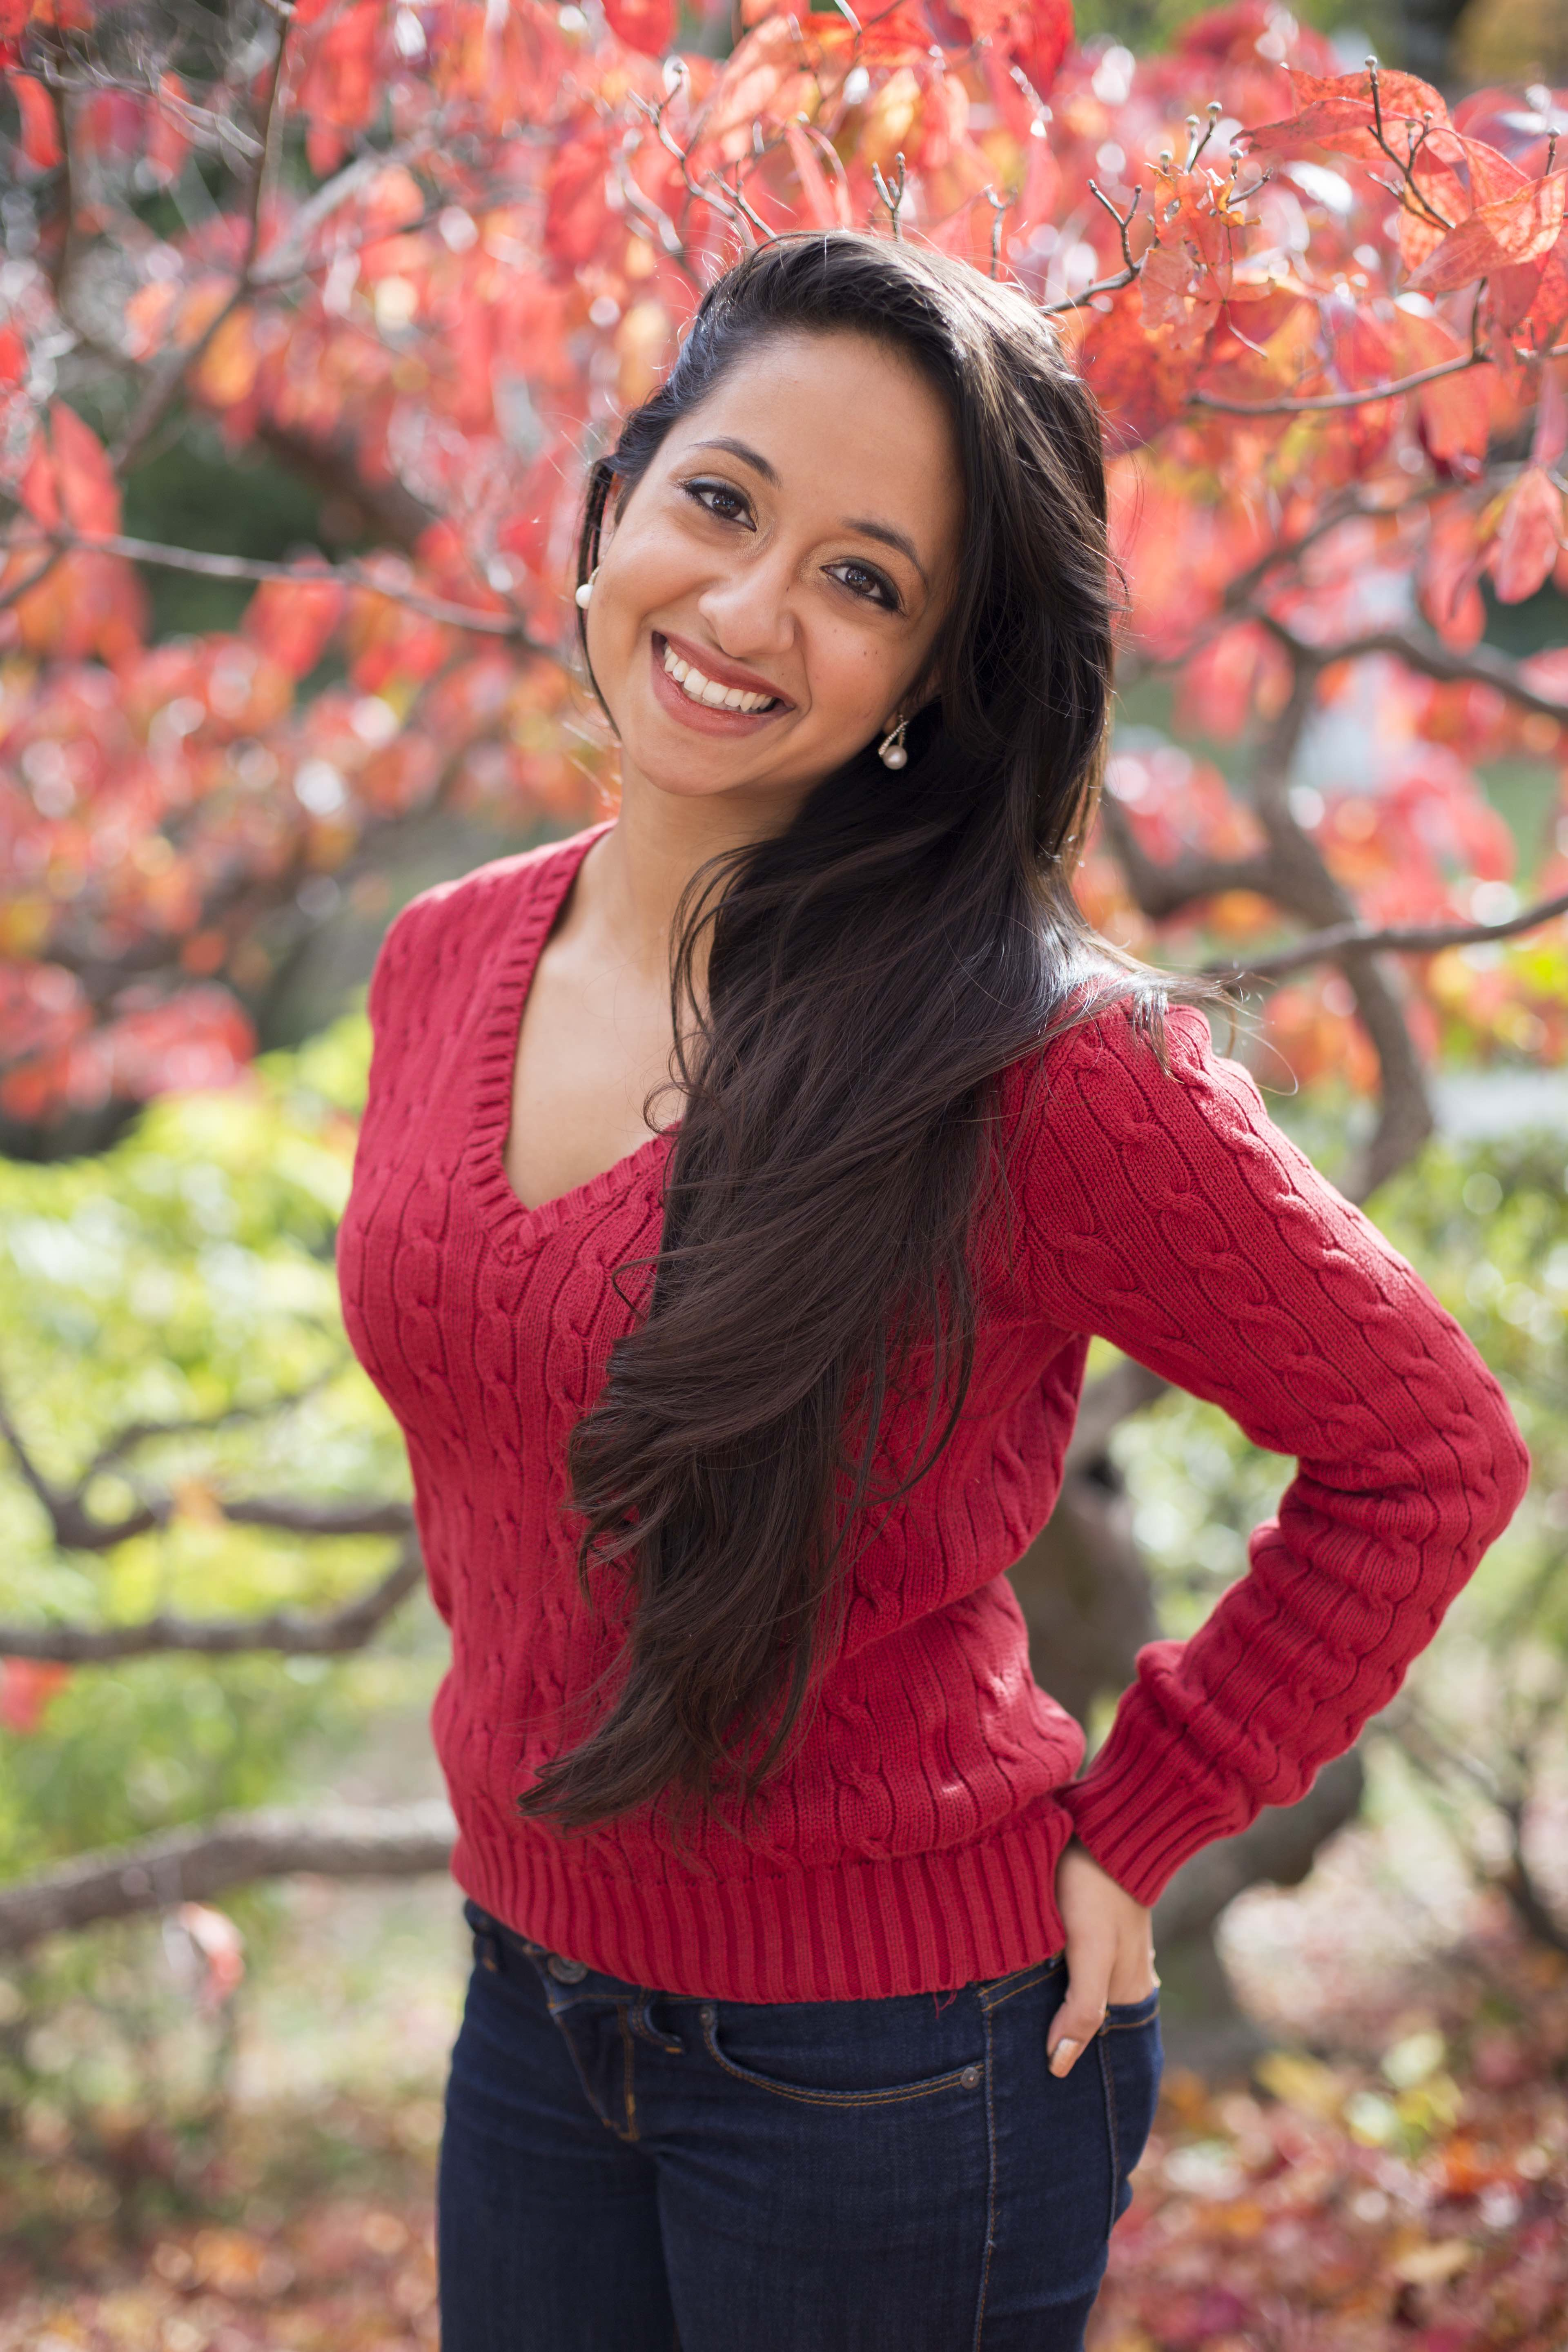 A young woman with a red sweater and jeans on smiles in front of the changing autumn trees.